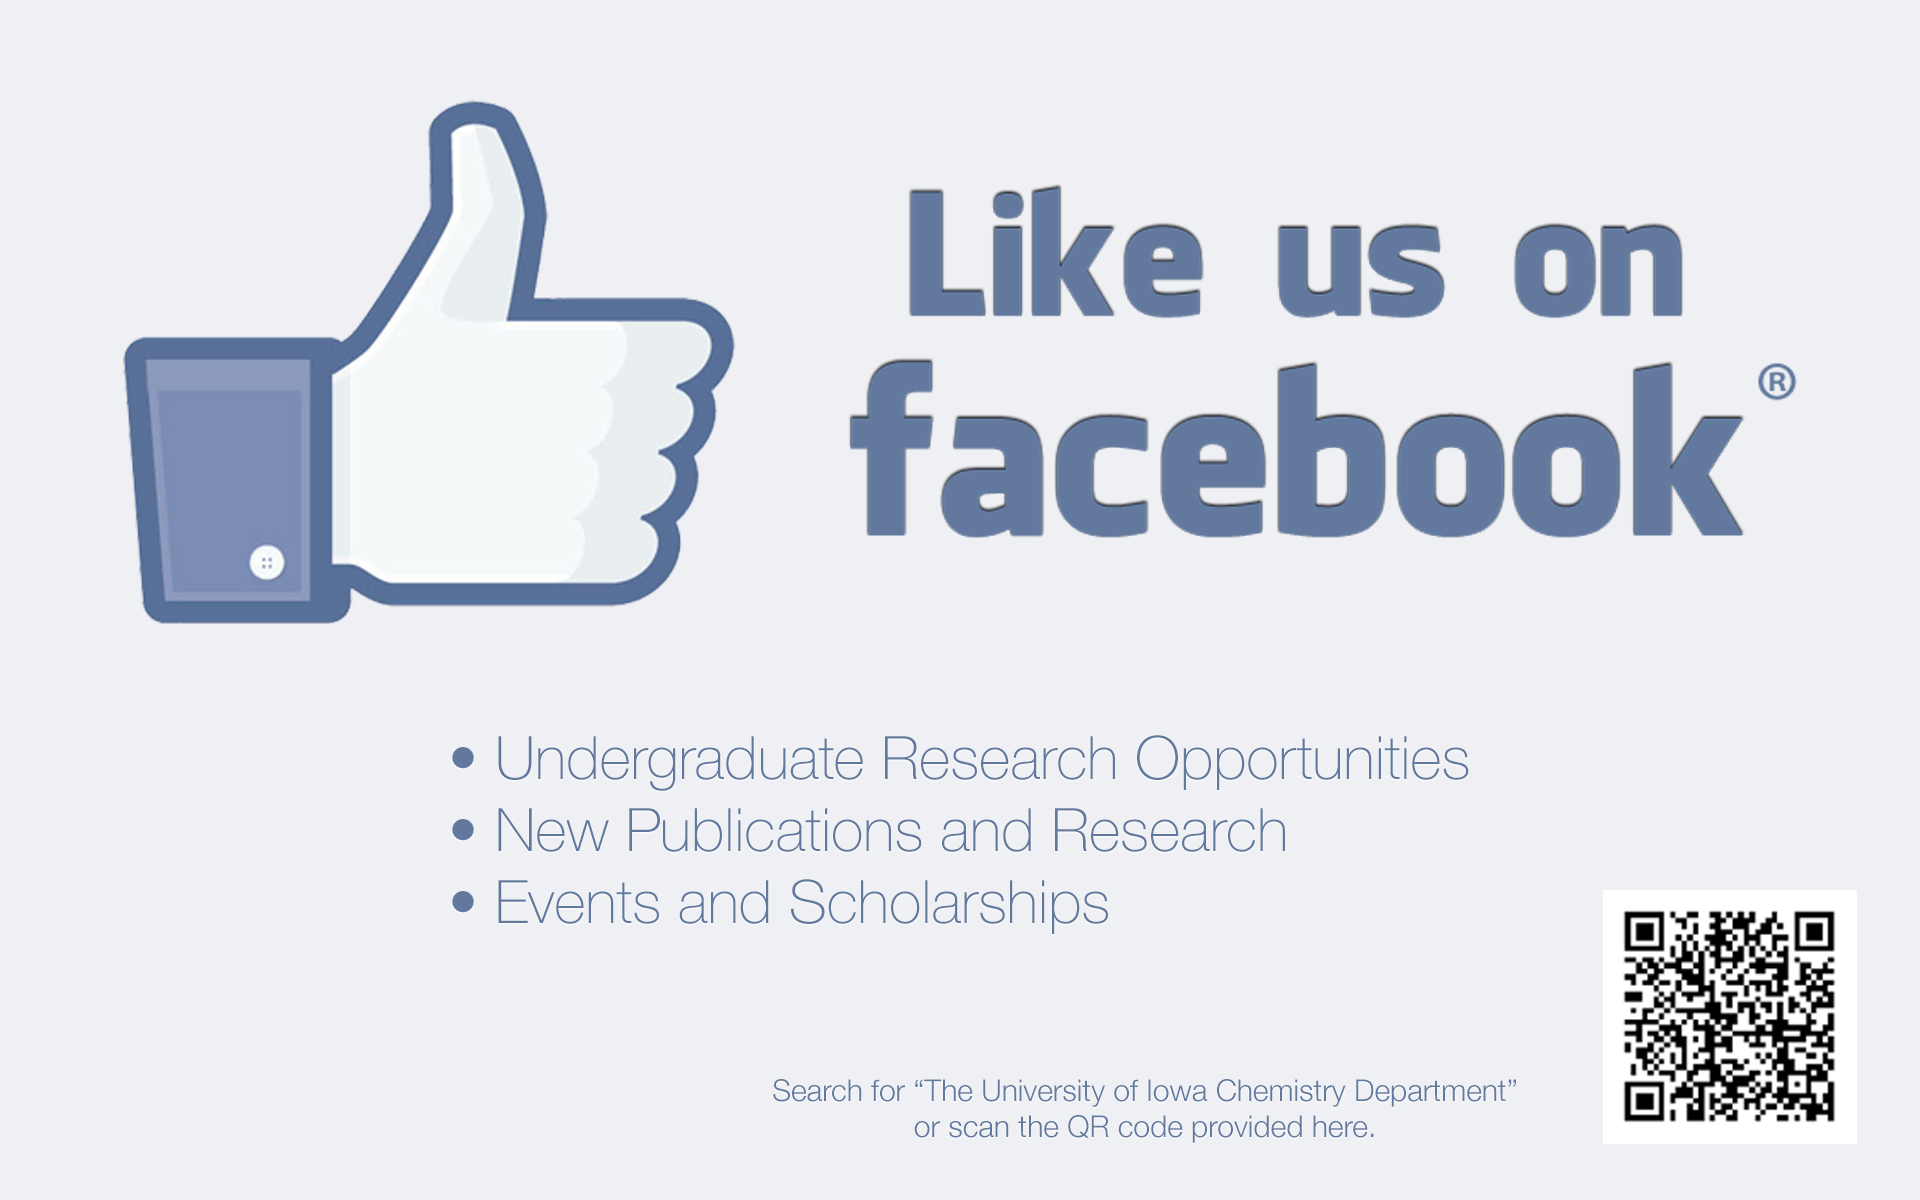 Live "The University of Iowa Chemistry Department" on Facebook.